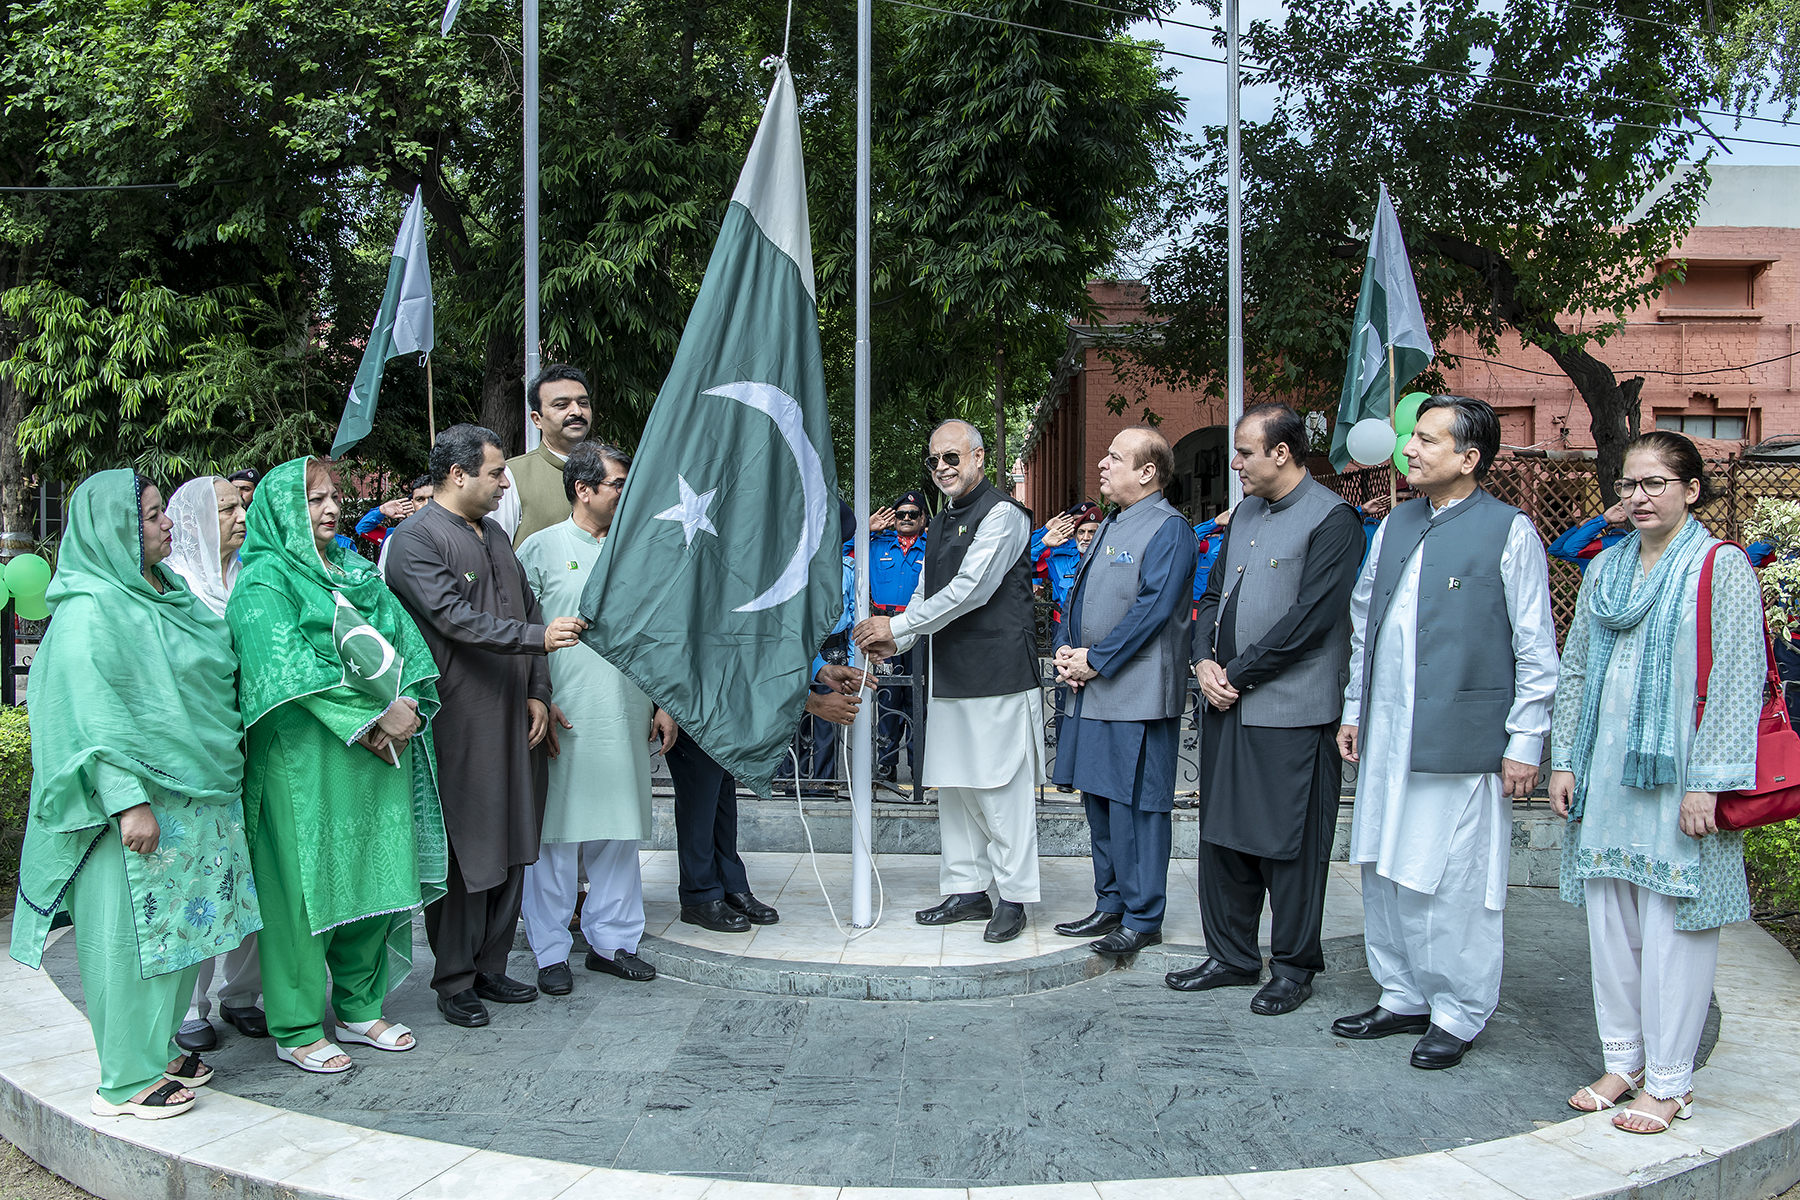 UVAS celebrates 76th Independence Day of Pakistan in befitting manner